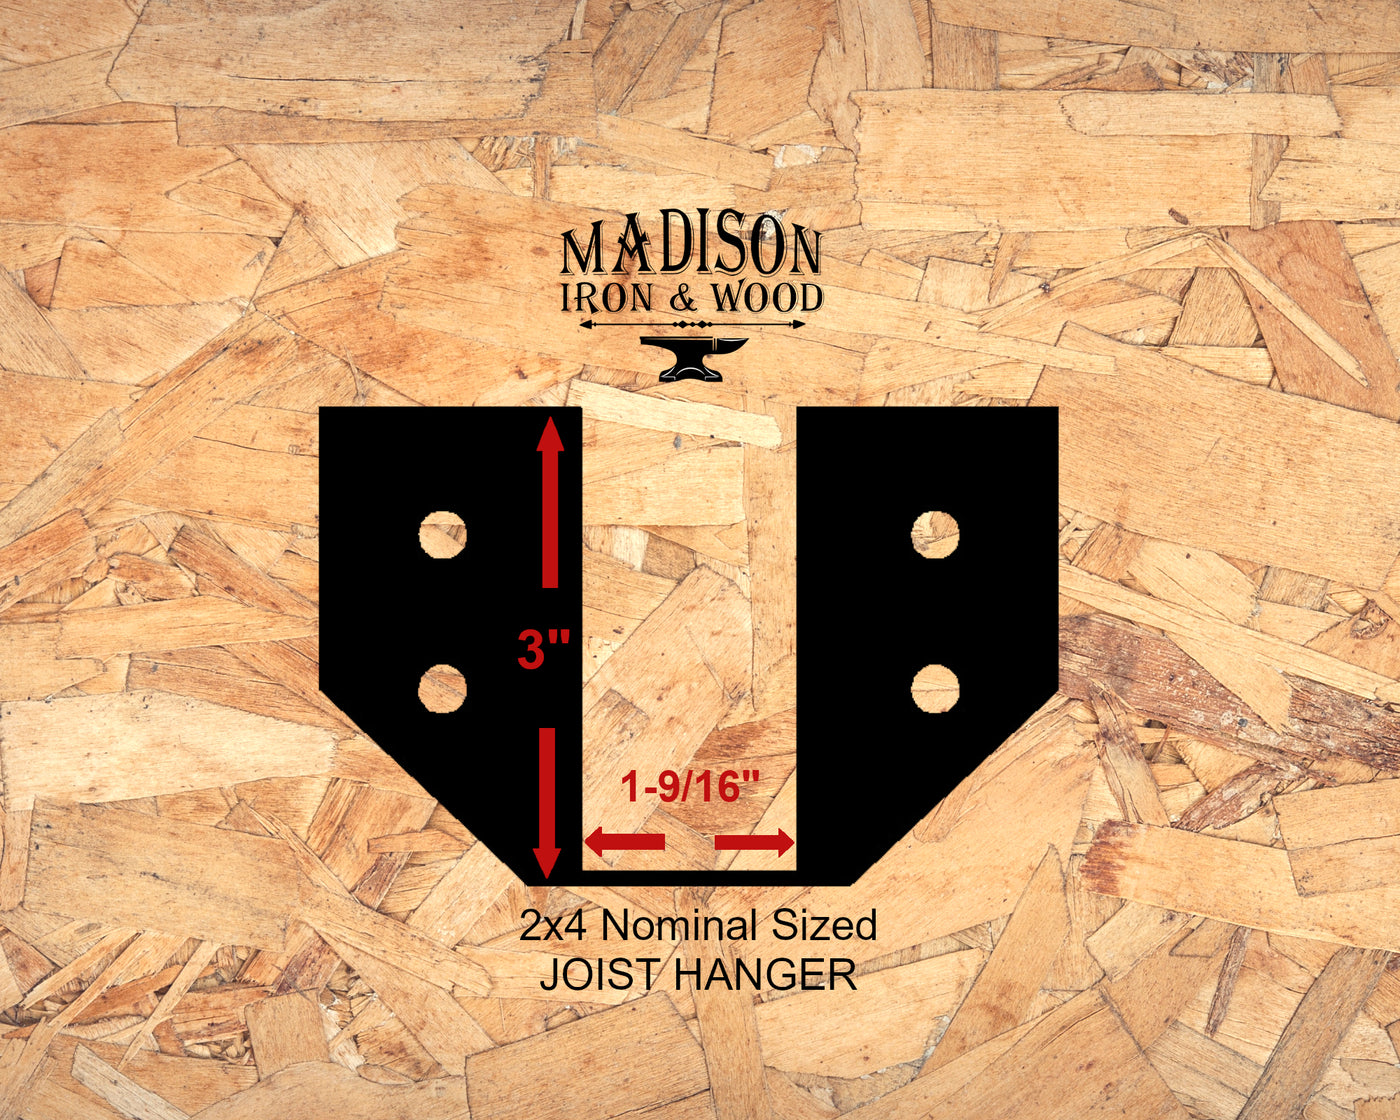 2"x4" Joist Hanger Bracket - Madison Iron and Wood - Brackets - metal outdoor decor - Steel deocrations - american made products - veteran owned business products - fencing decorations - fencing supplies - custom wall decorations - personalized wall signs - steel - decorative post caps - steel post caps - metal post caps - brackets - structural brackets - home improvement - easter - easter decorations - easter gift - easter yard decor